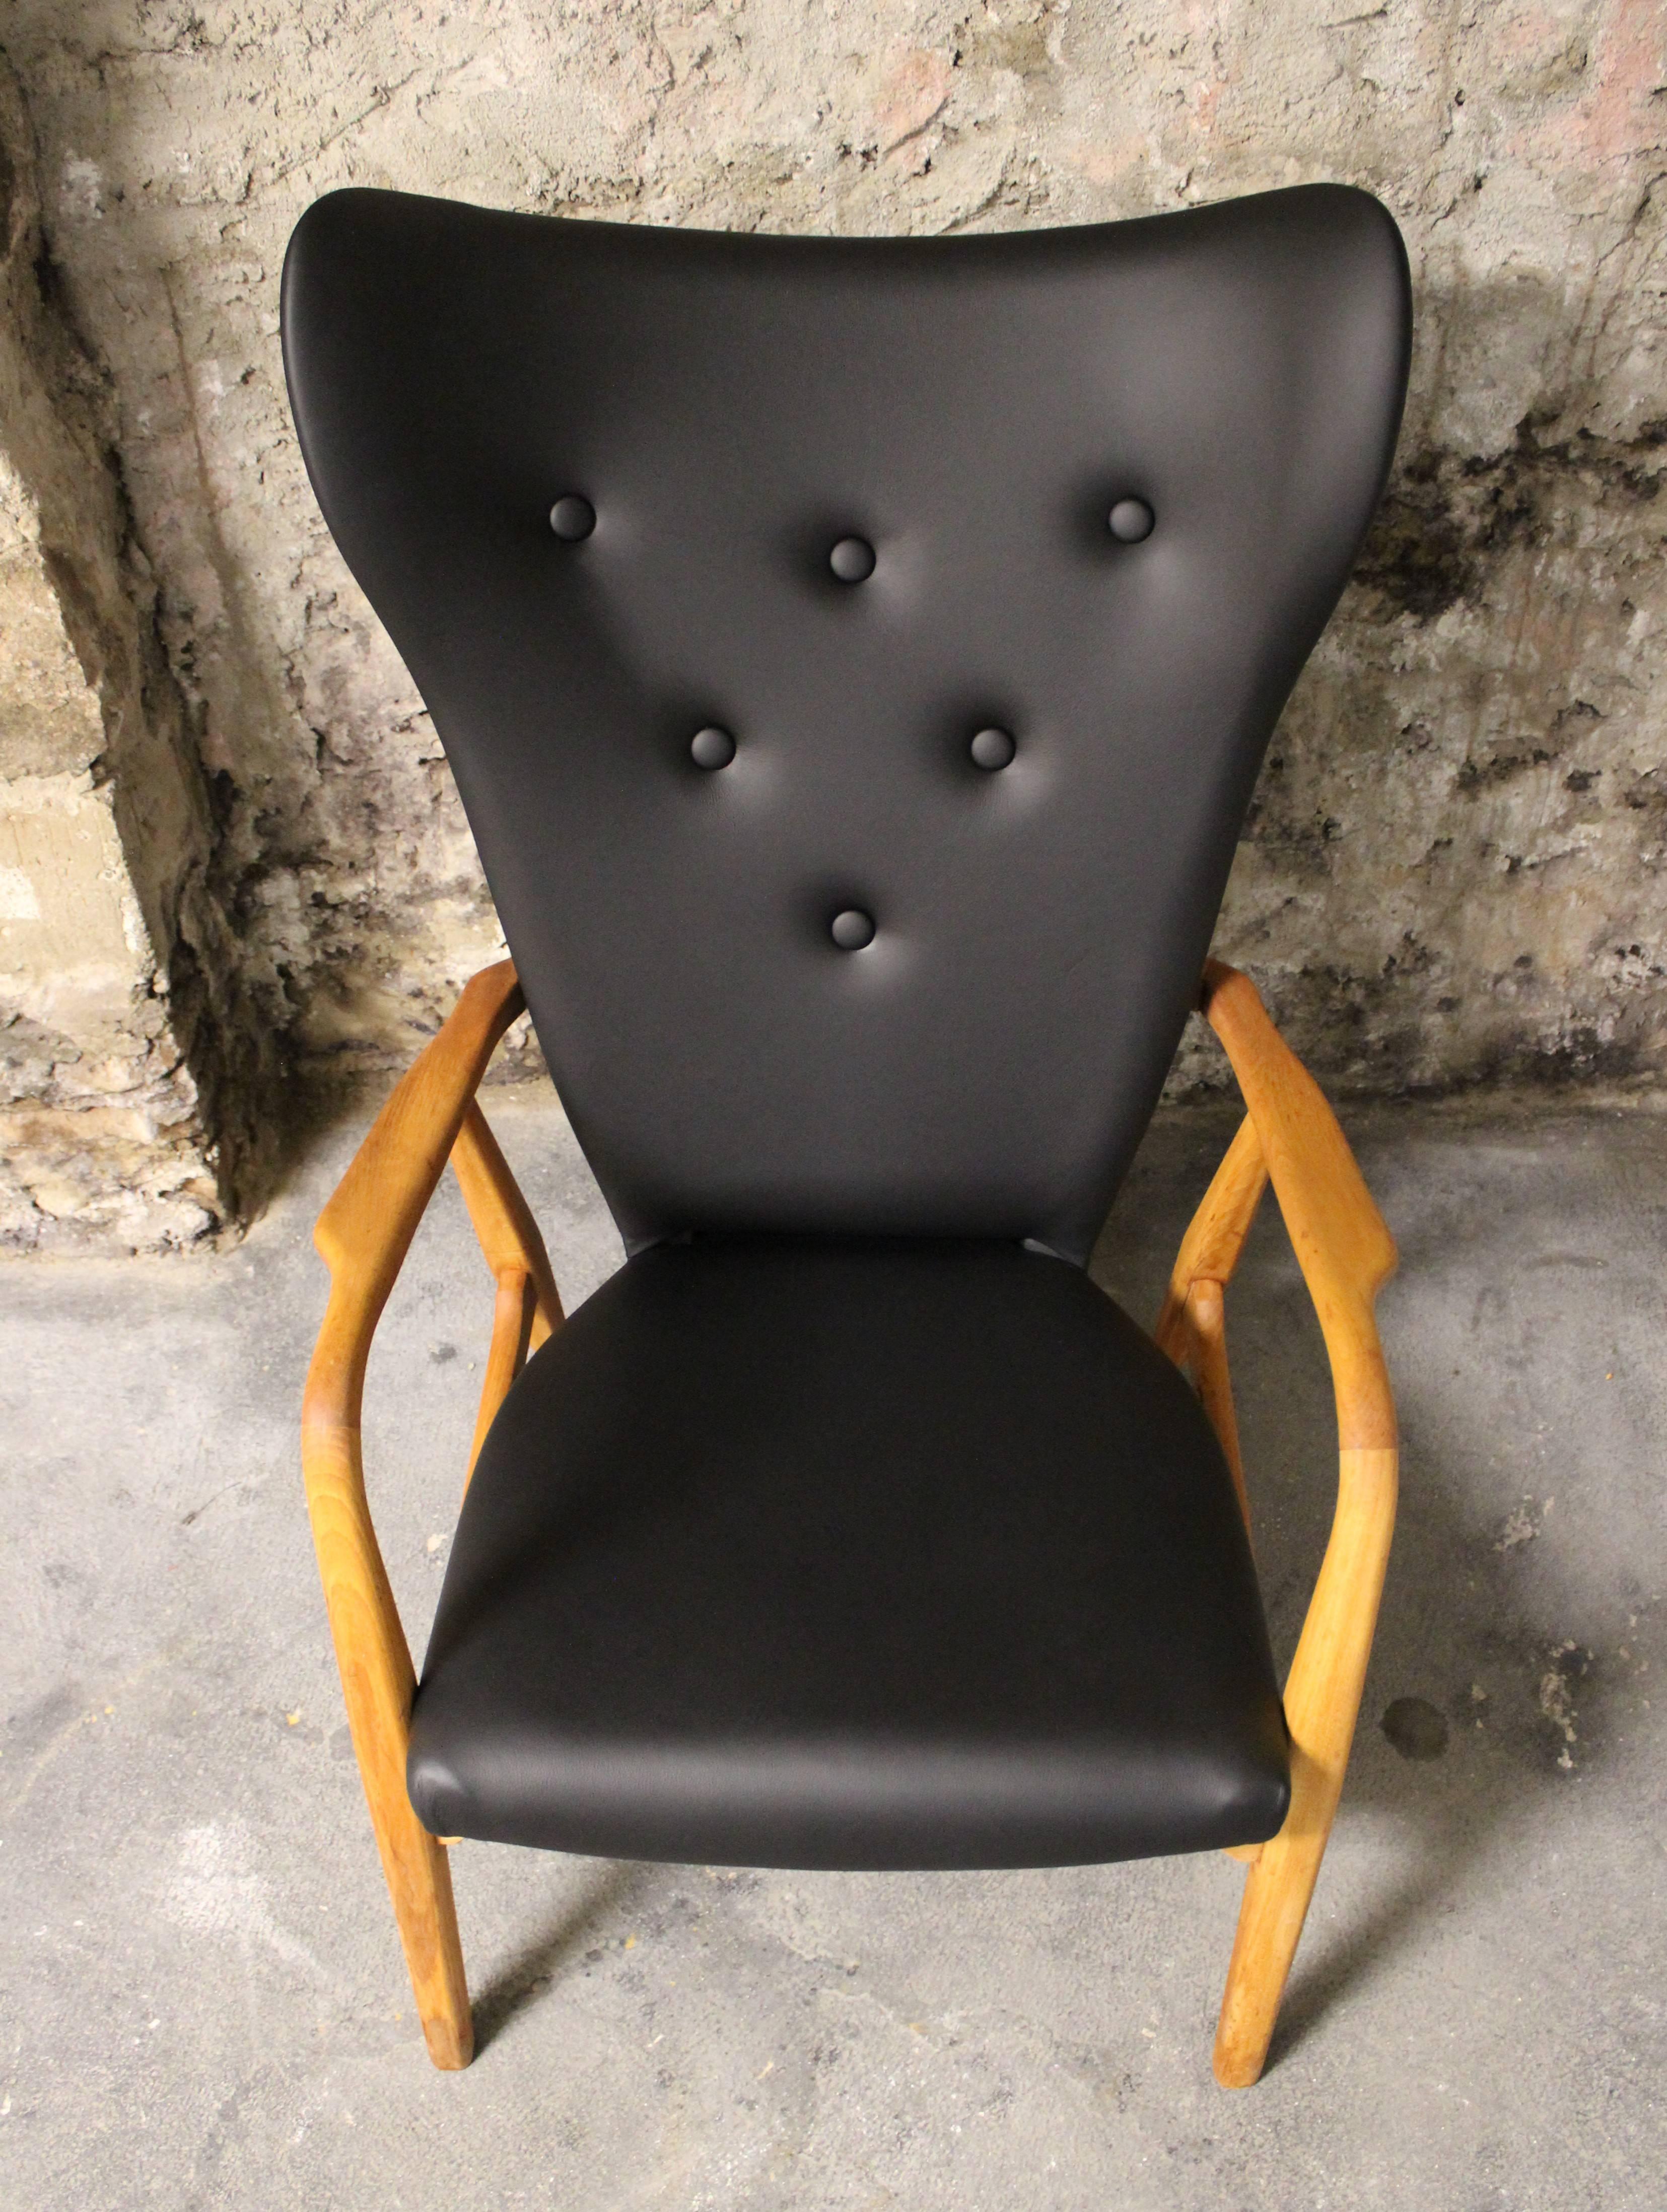 Mid-20th Century Madsen and Schubell Wingback Lounge Chair for Vik and Blinheim